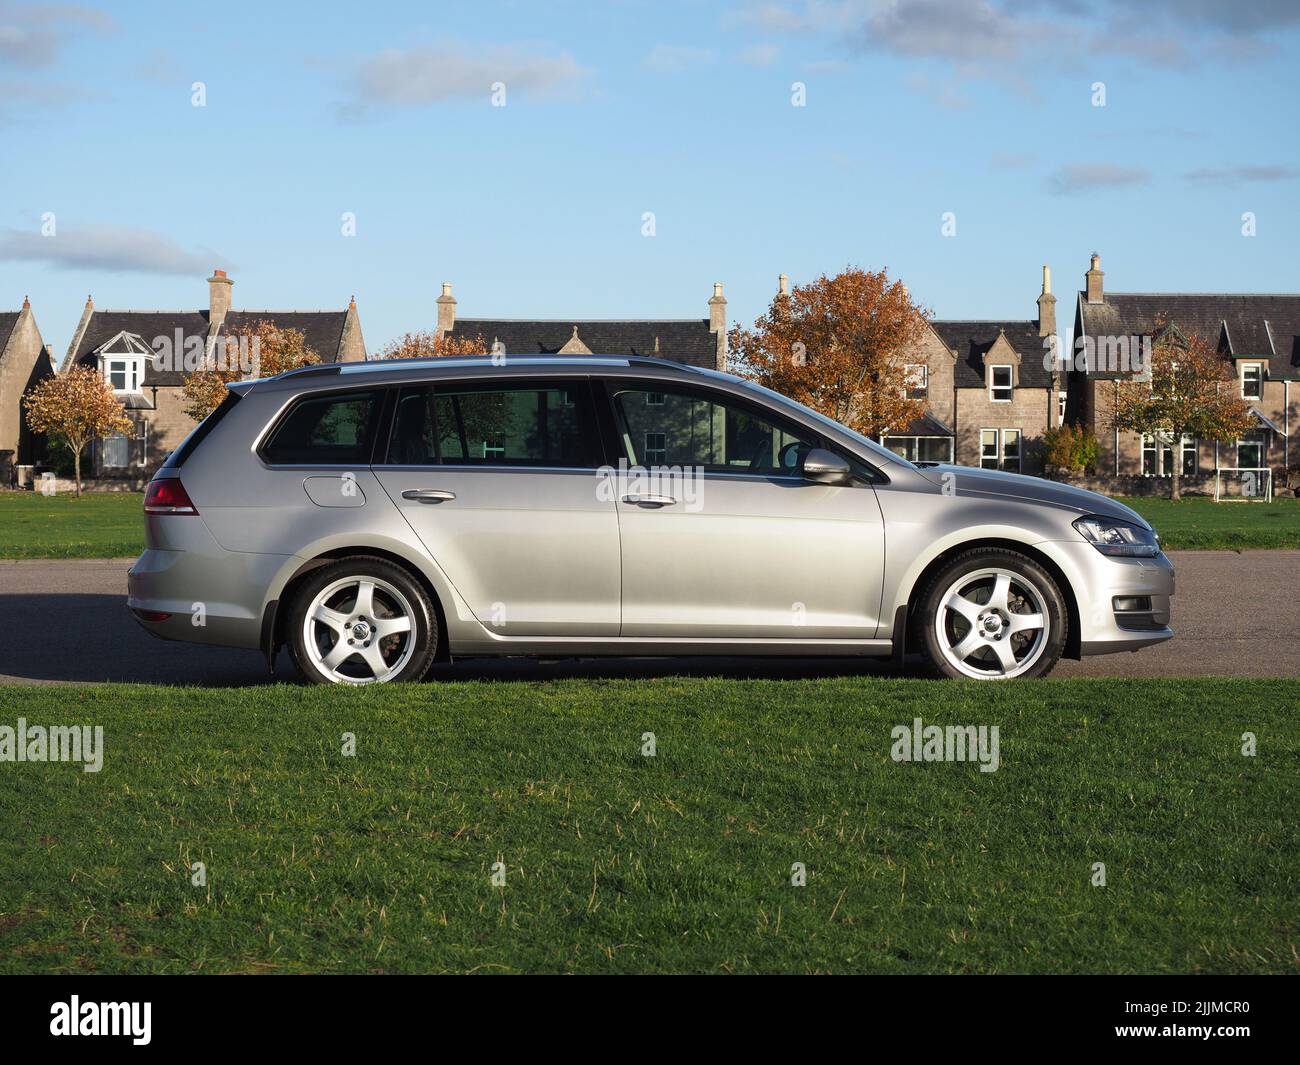 Tungsten silver Volkswagen Golf MK7 estate, variant, Team Dynamics Pro Race  3 Alloys. Trees with leaves in full autumnal colours & an old stone wall  Stock Photo - Alamy